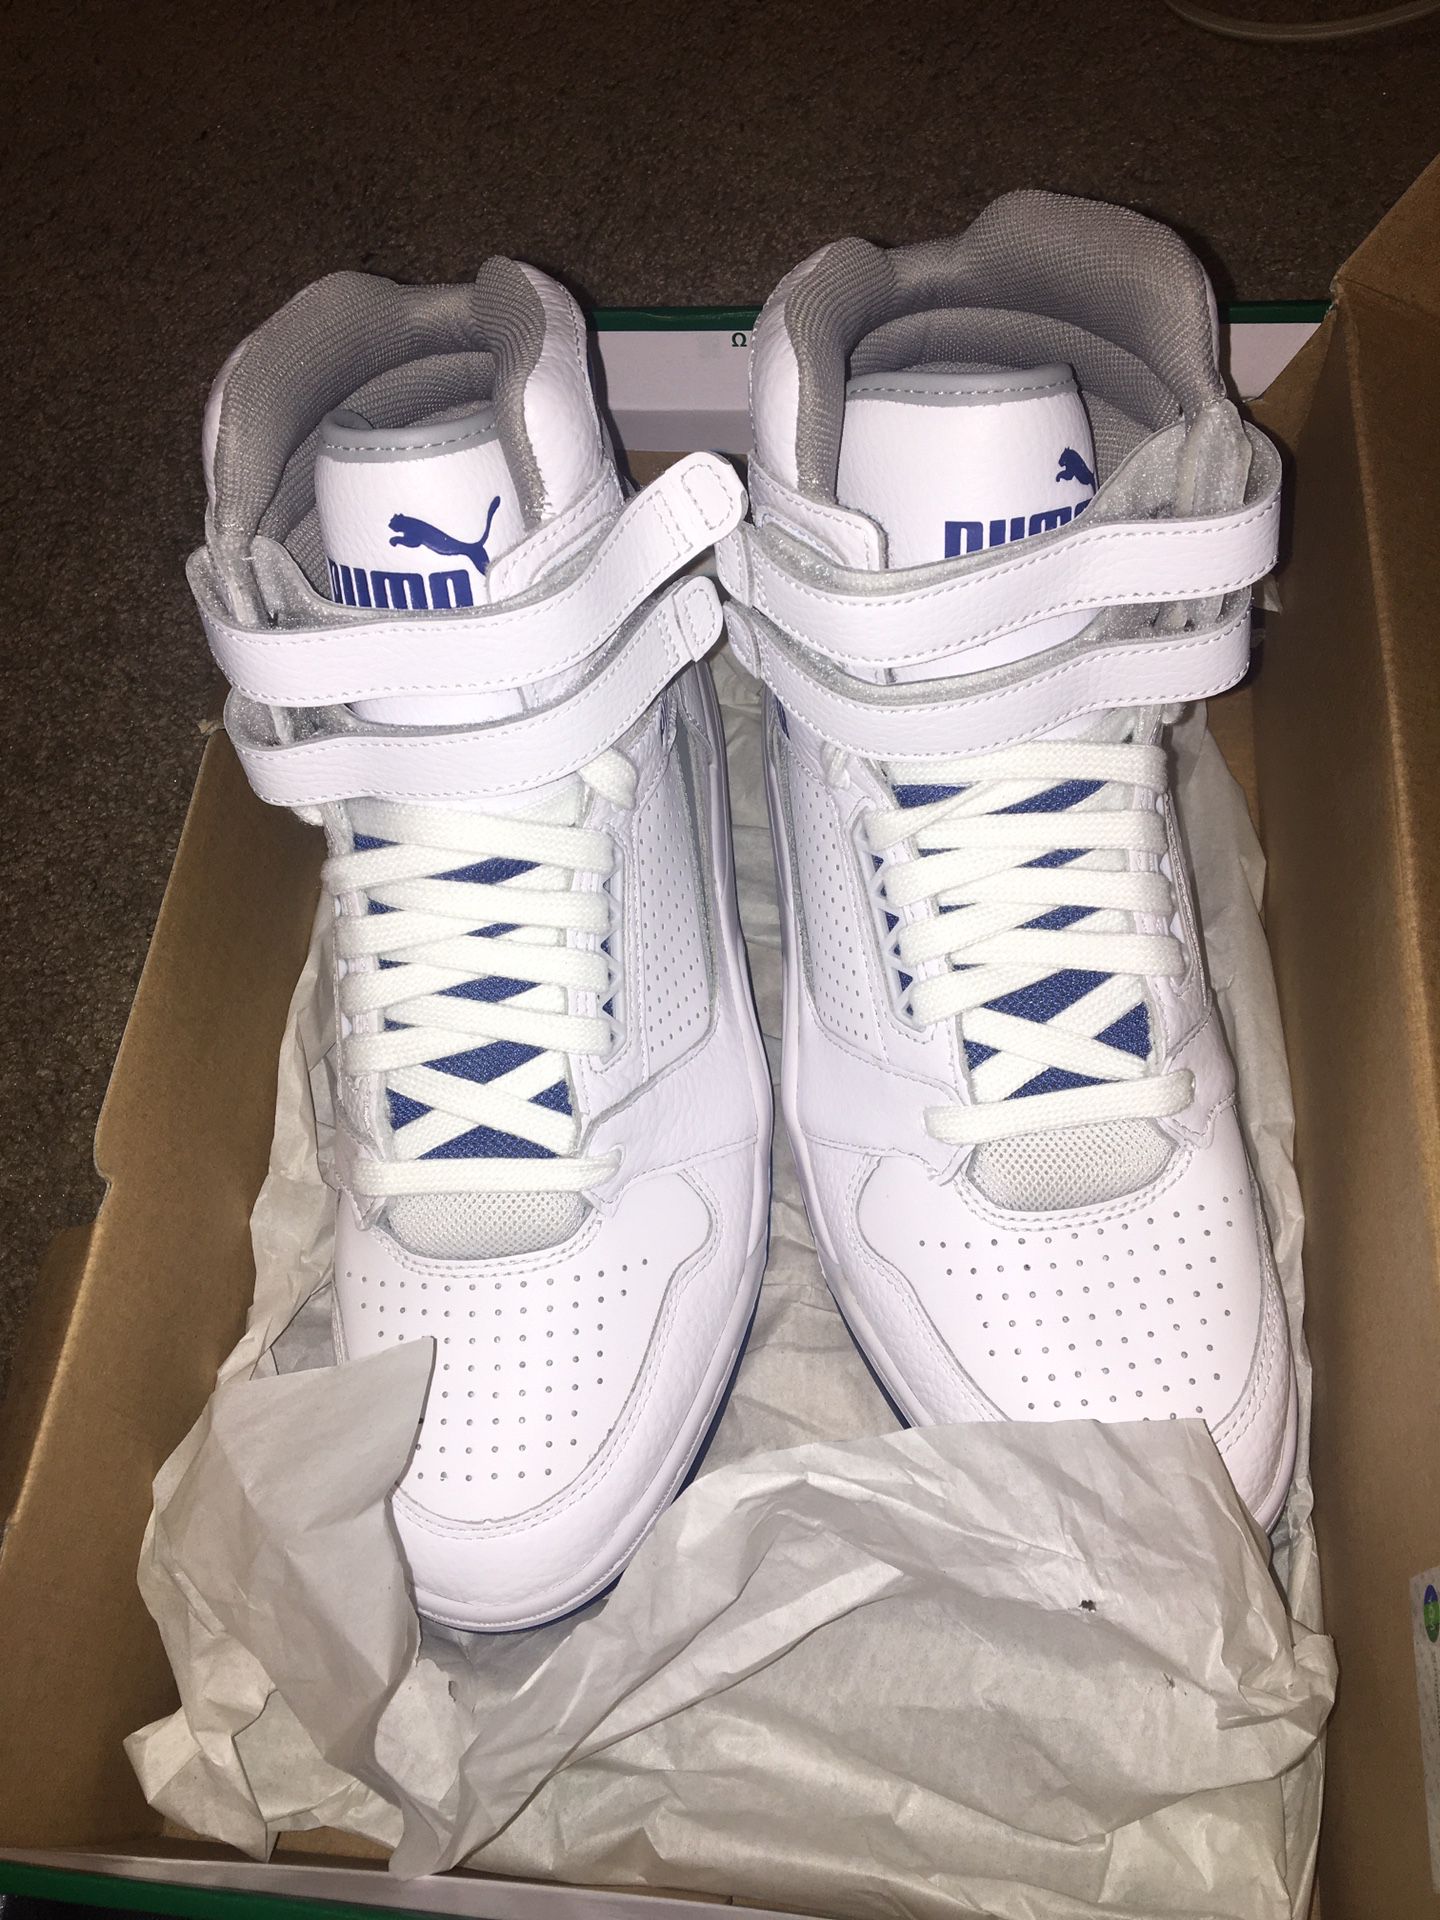 Brand new Puma Size 9 brand never been Worn Need gone asap